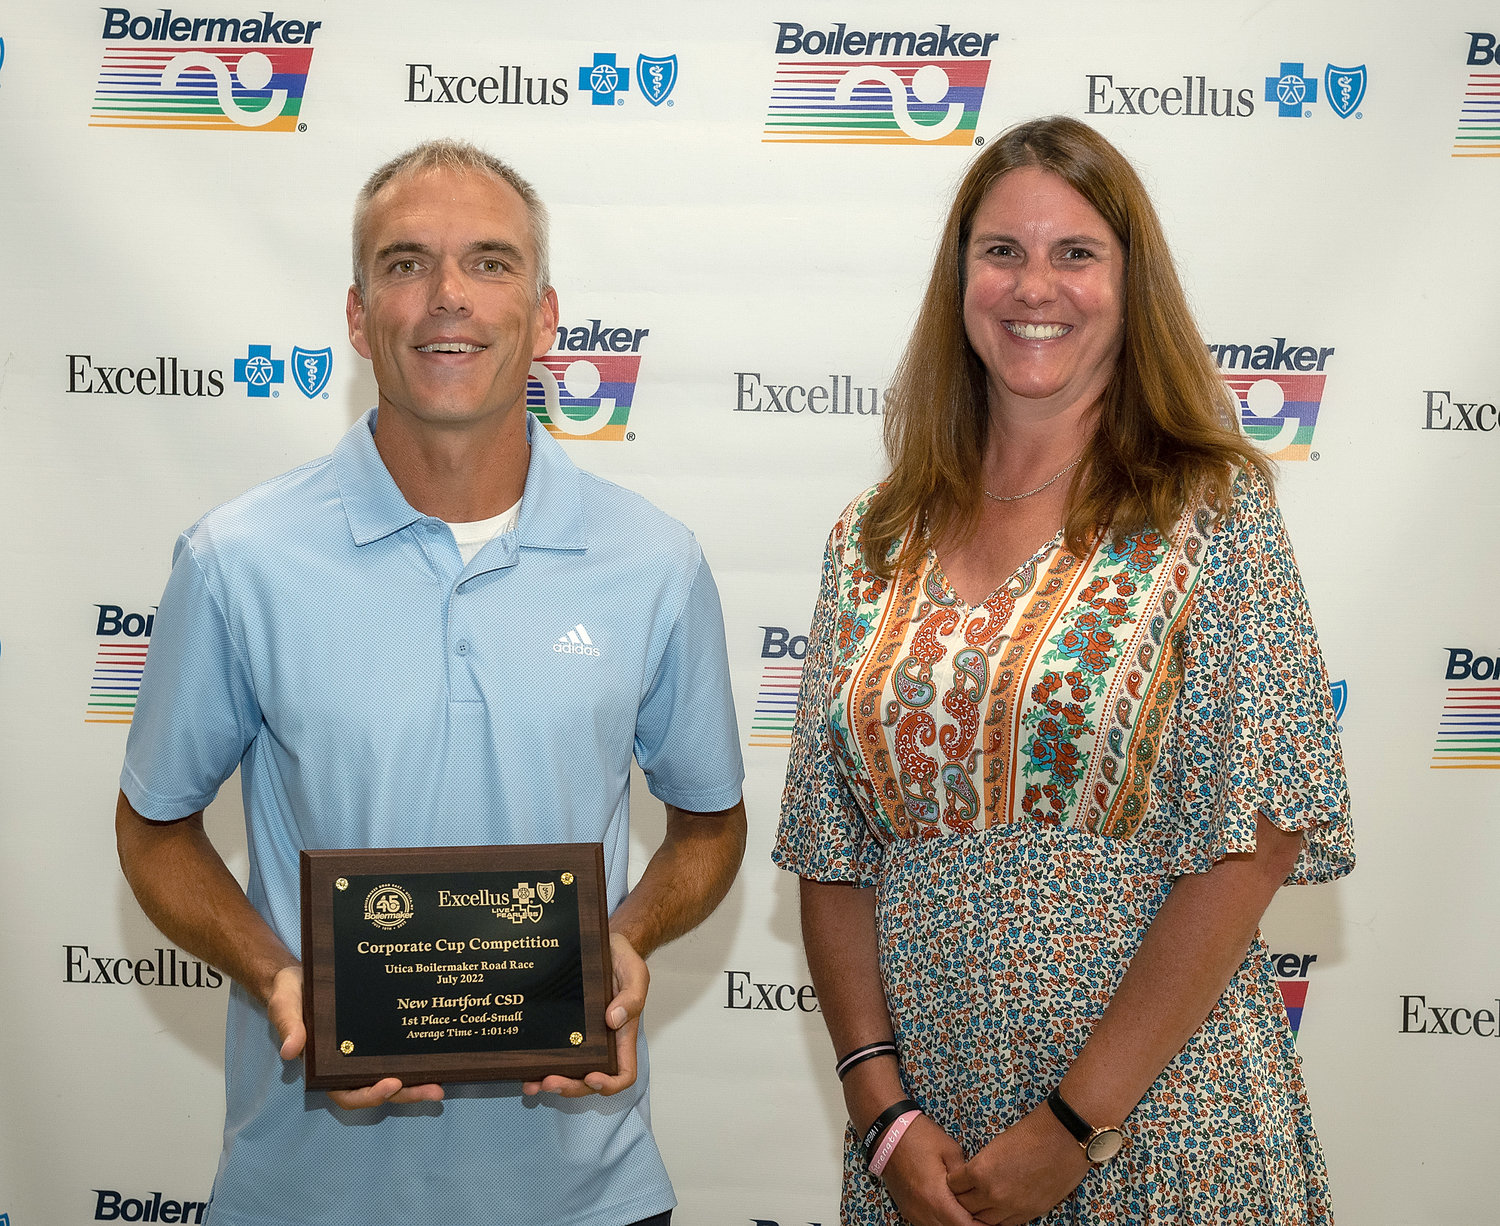 New Hartford Central School District team captain Michael Brych, left, accepts the award for the fastest co-ed small team category in the 2022 Boilermaker Road Race Corporate Cup. At right is Shayna Keller, community investments and partnerships manager, Utica region for Excellus BlueCross BlueShield, which sponsored the competition.